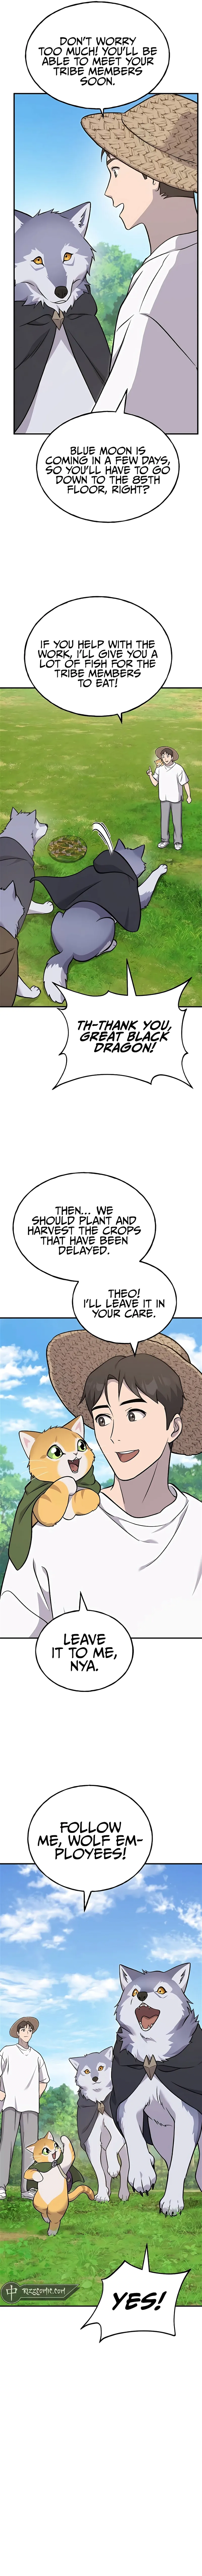 Solo Farming In The Tower Chapter 51 page 15